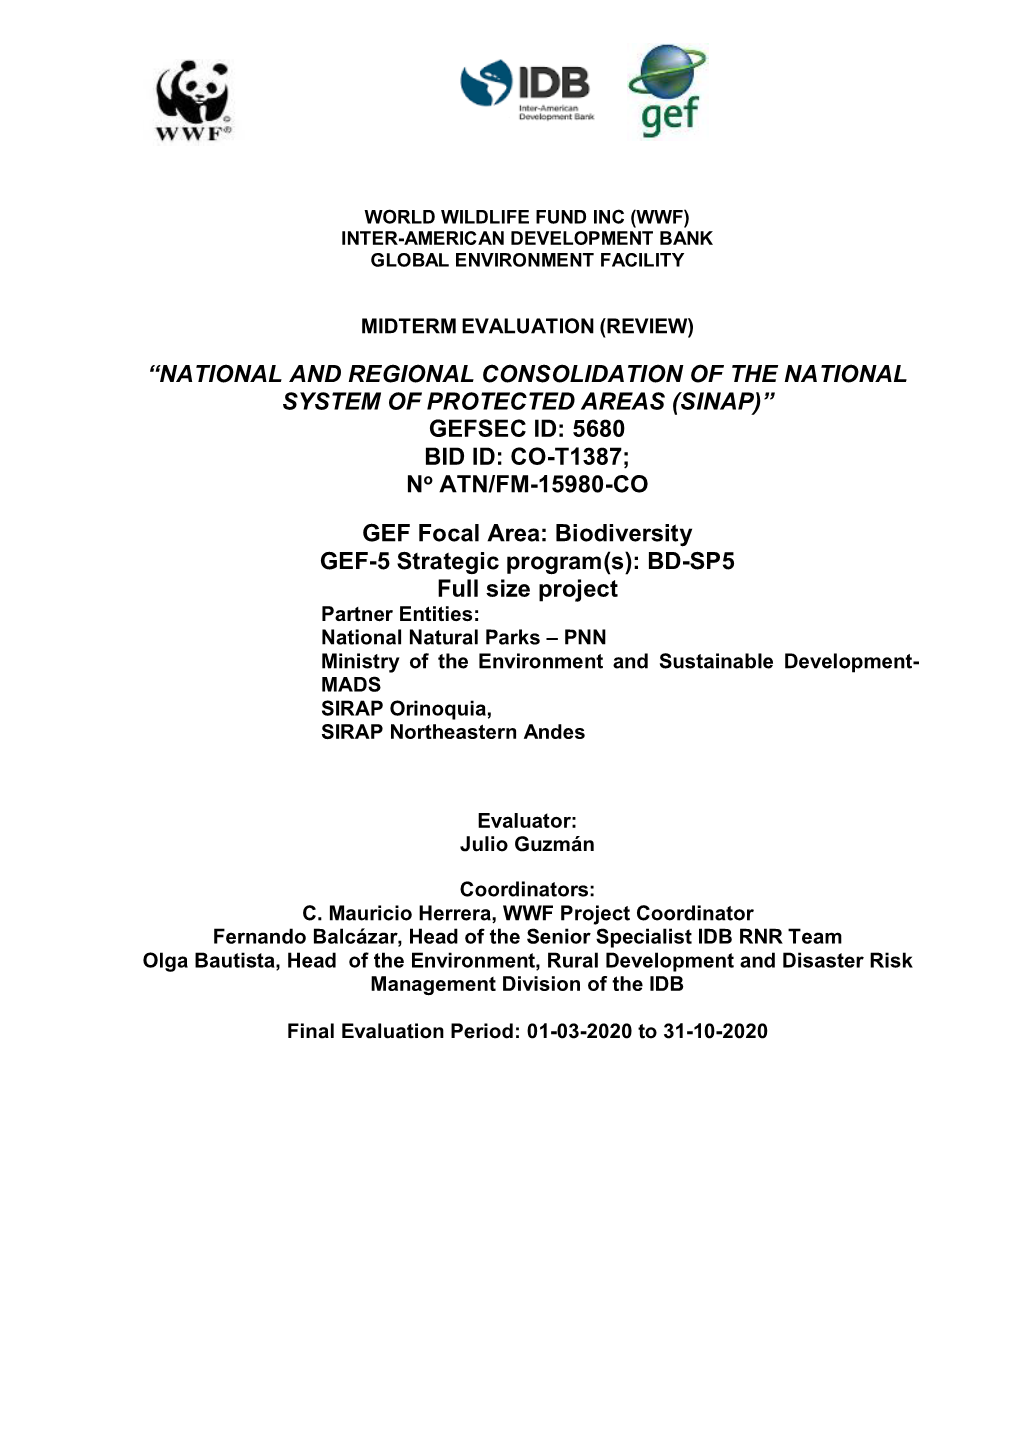 “NATIONAL and REGIONAL CONSOLIDATION of the NATIONAL SYSTEM of PROTECTED AREAS (SINAP)” GEFSEC ID: 5680 BID ID: CO-T1387; No ATN/FM-15980-CO